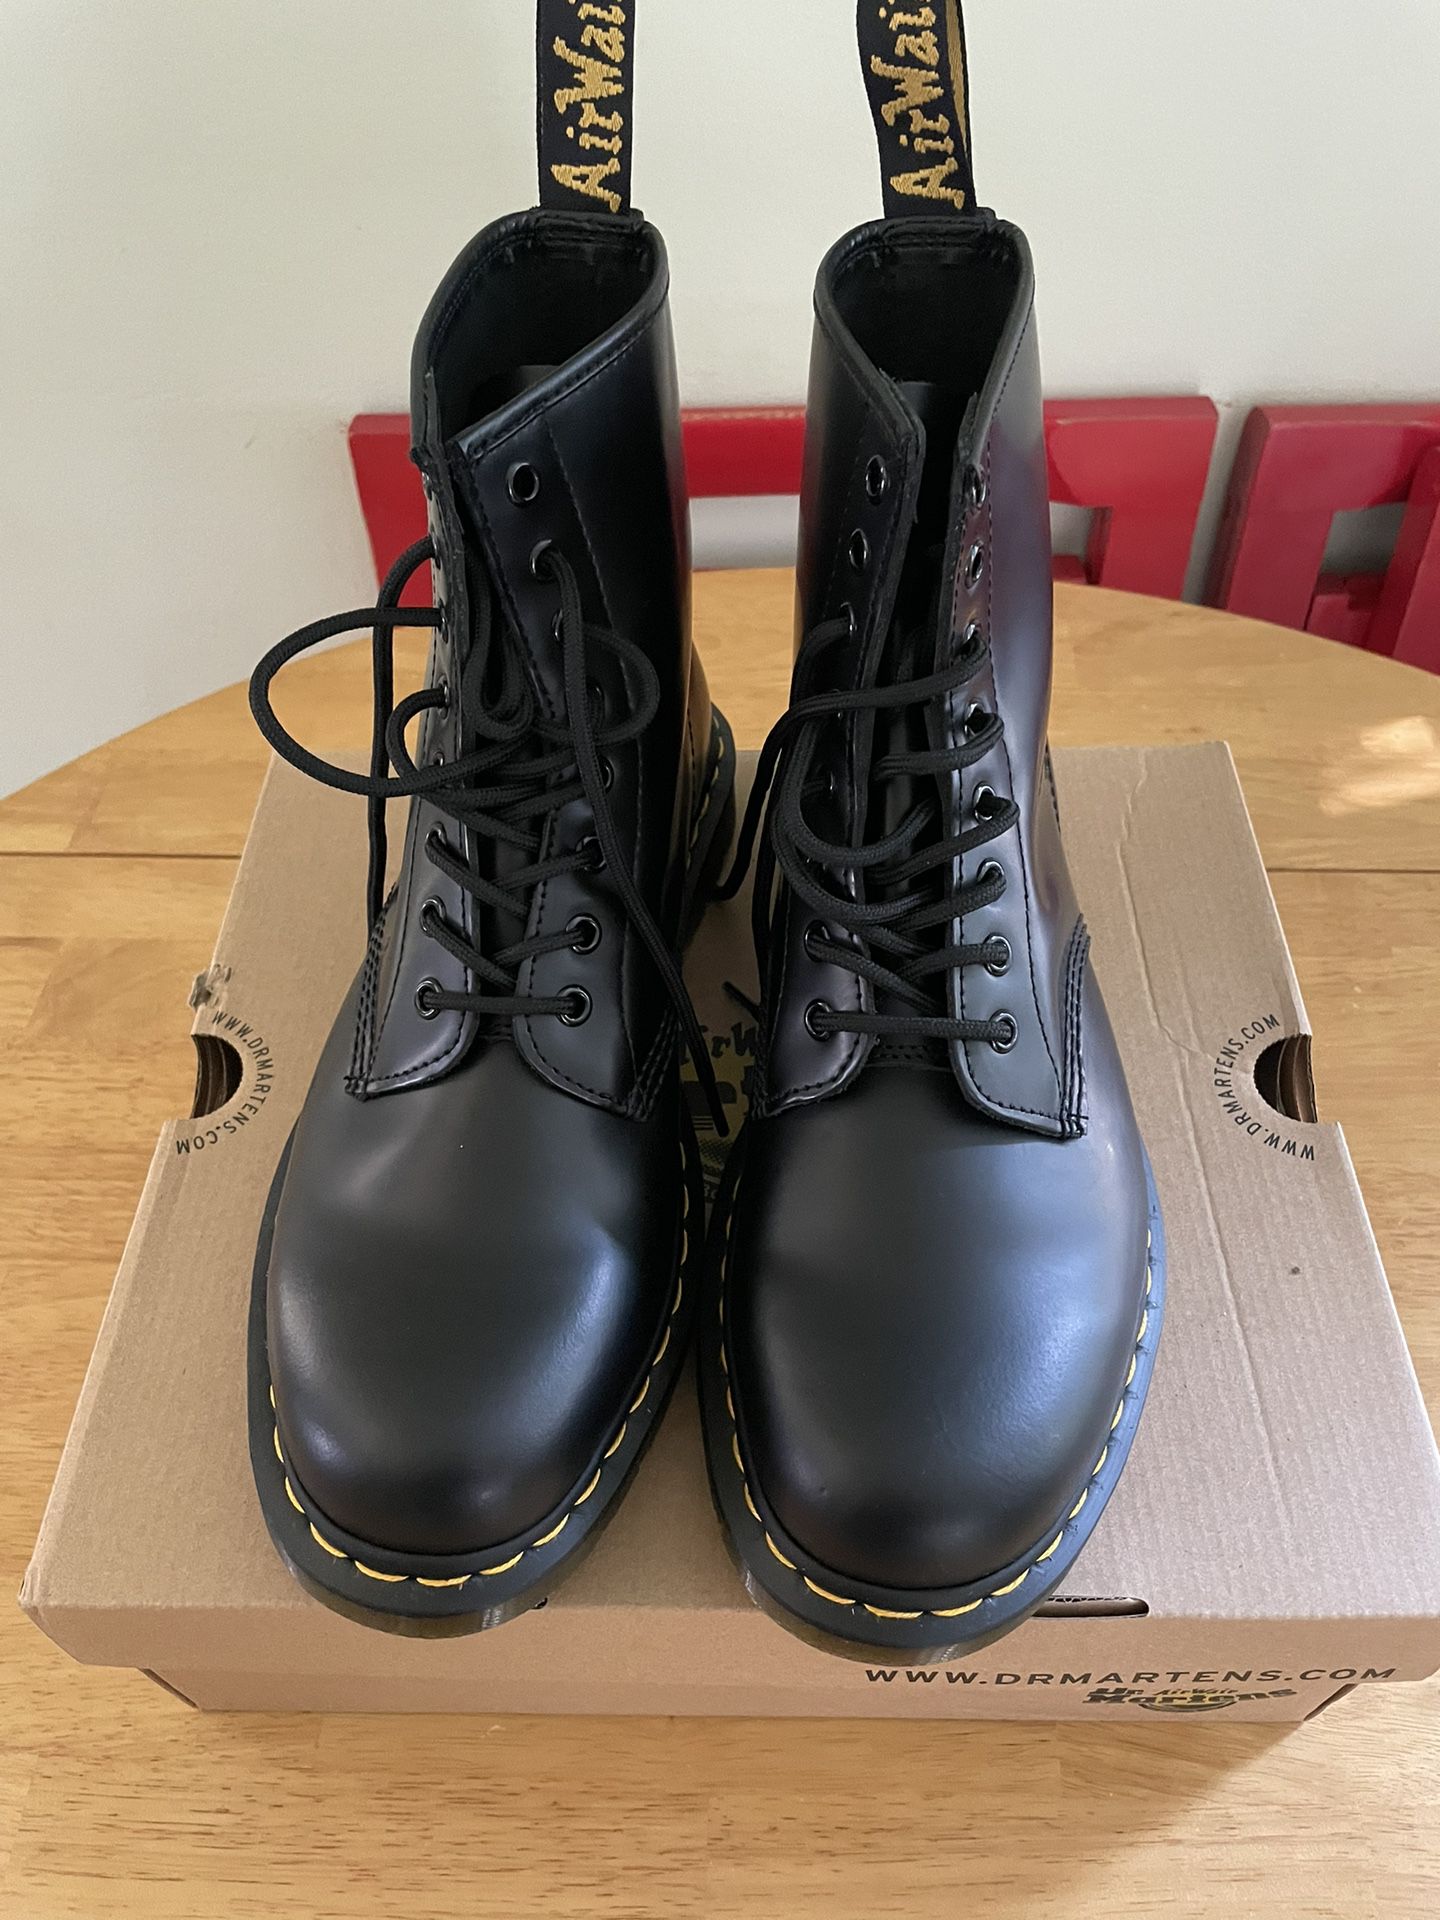 Dr. Martens Boots - Size 9 - New